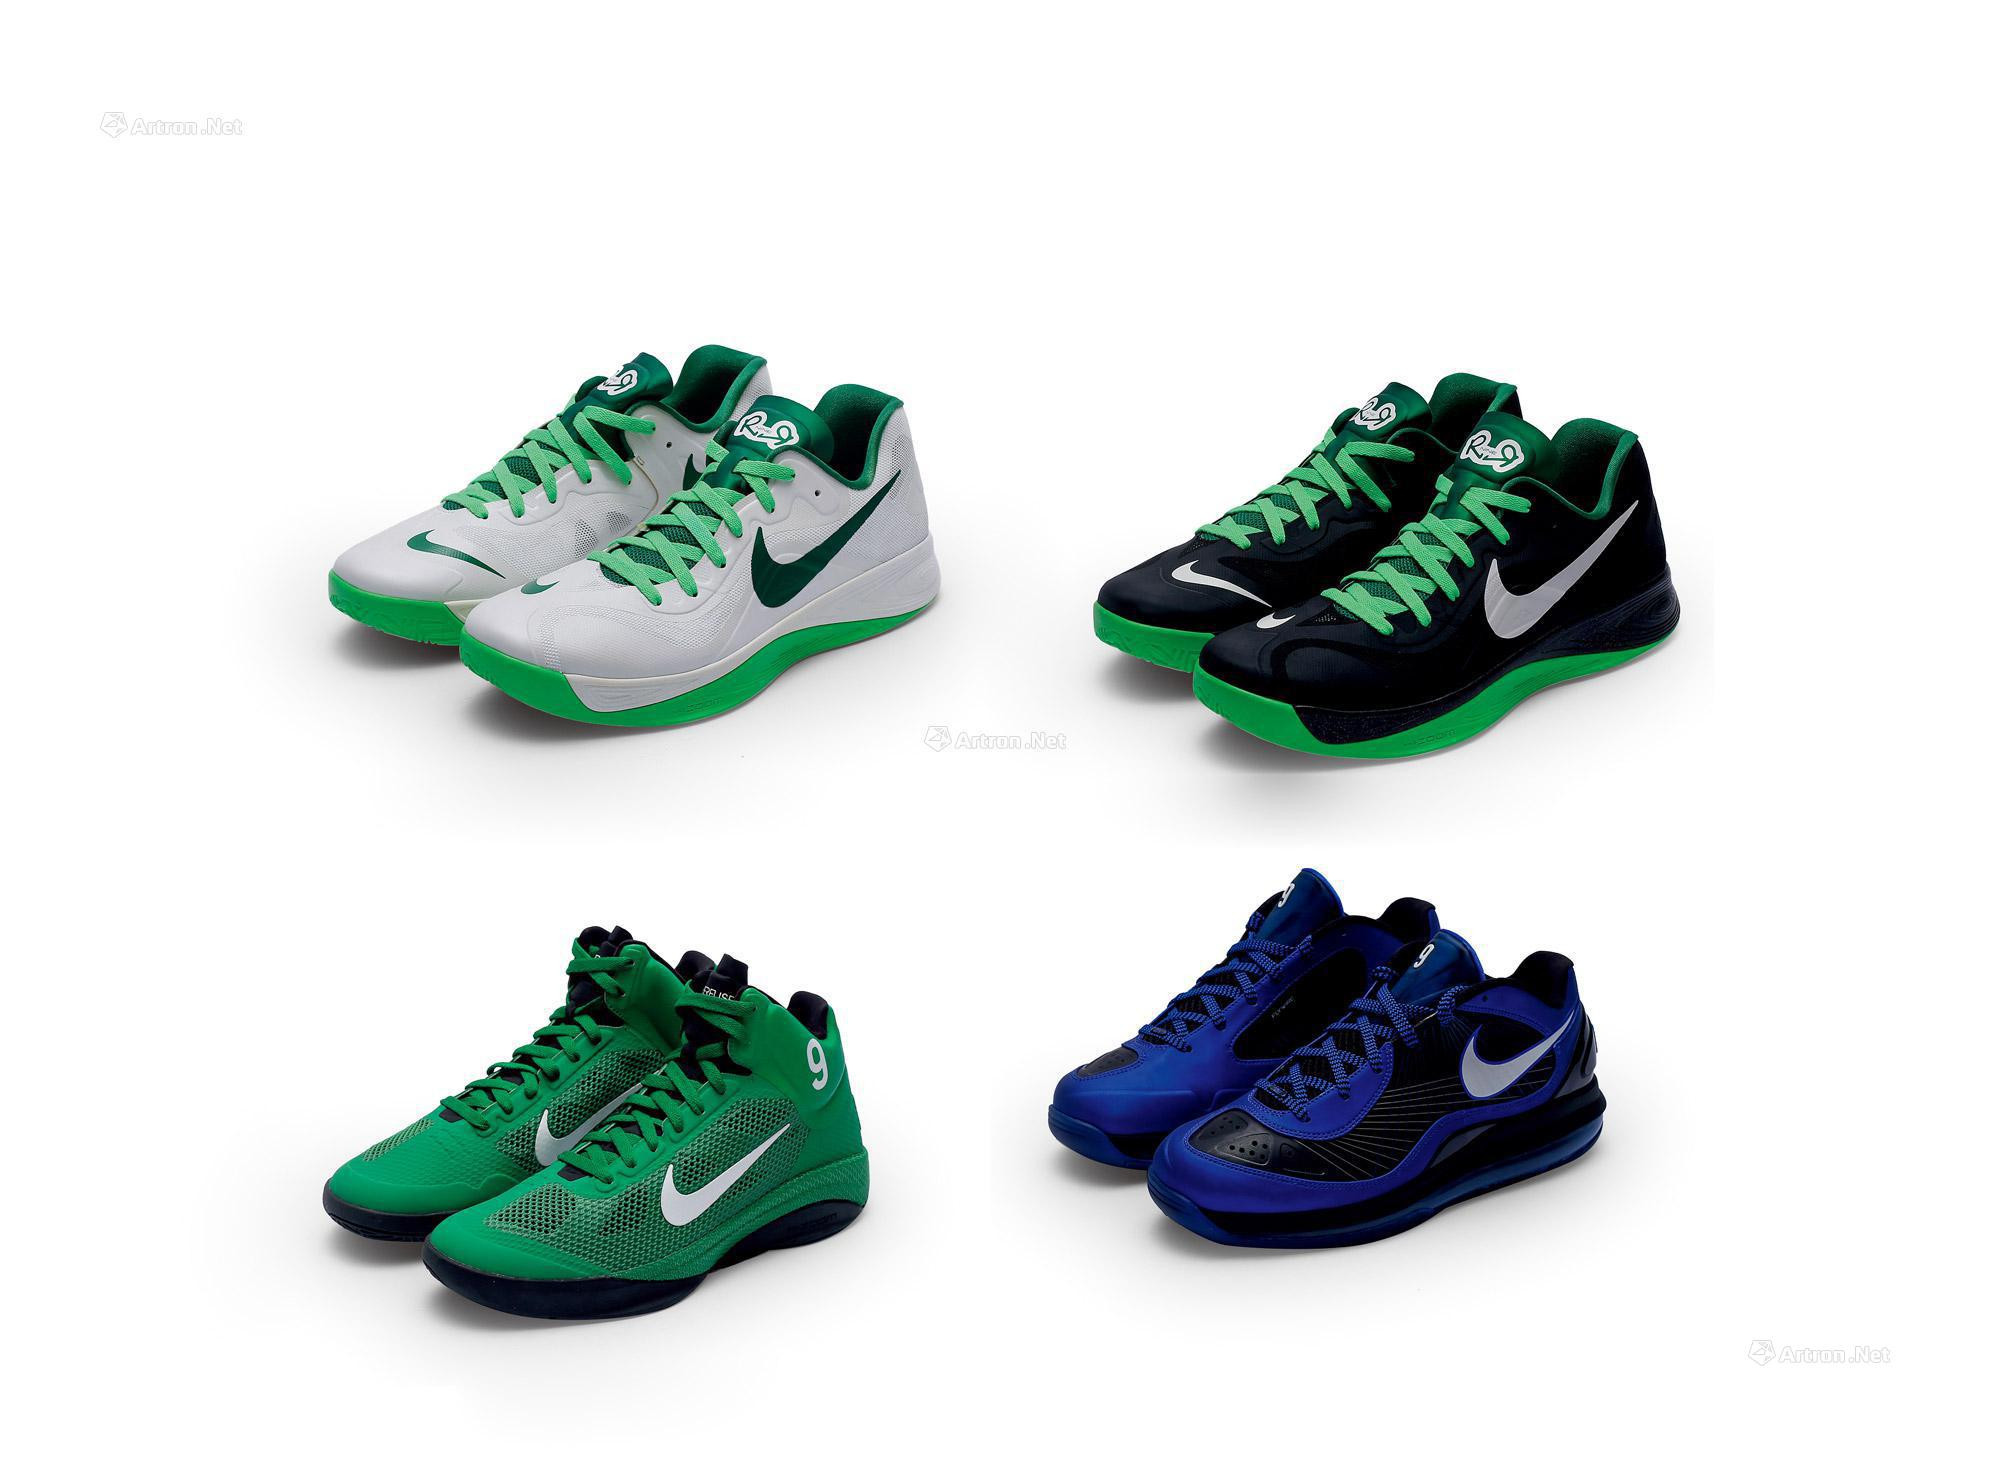 Rajon Rondo Exclusive Sneaker Collection  4 Pairs of Player Exclusive Sneakers